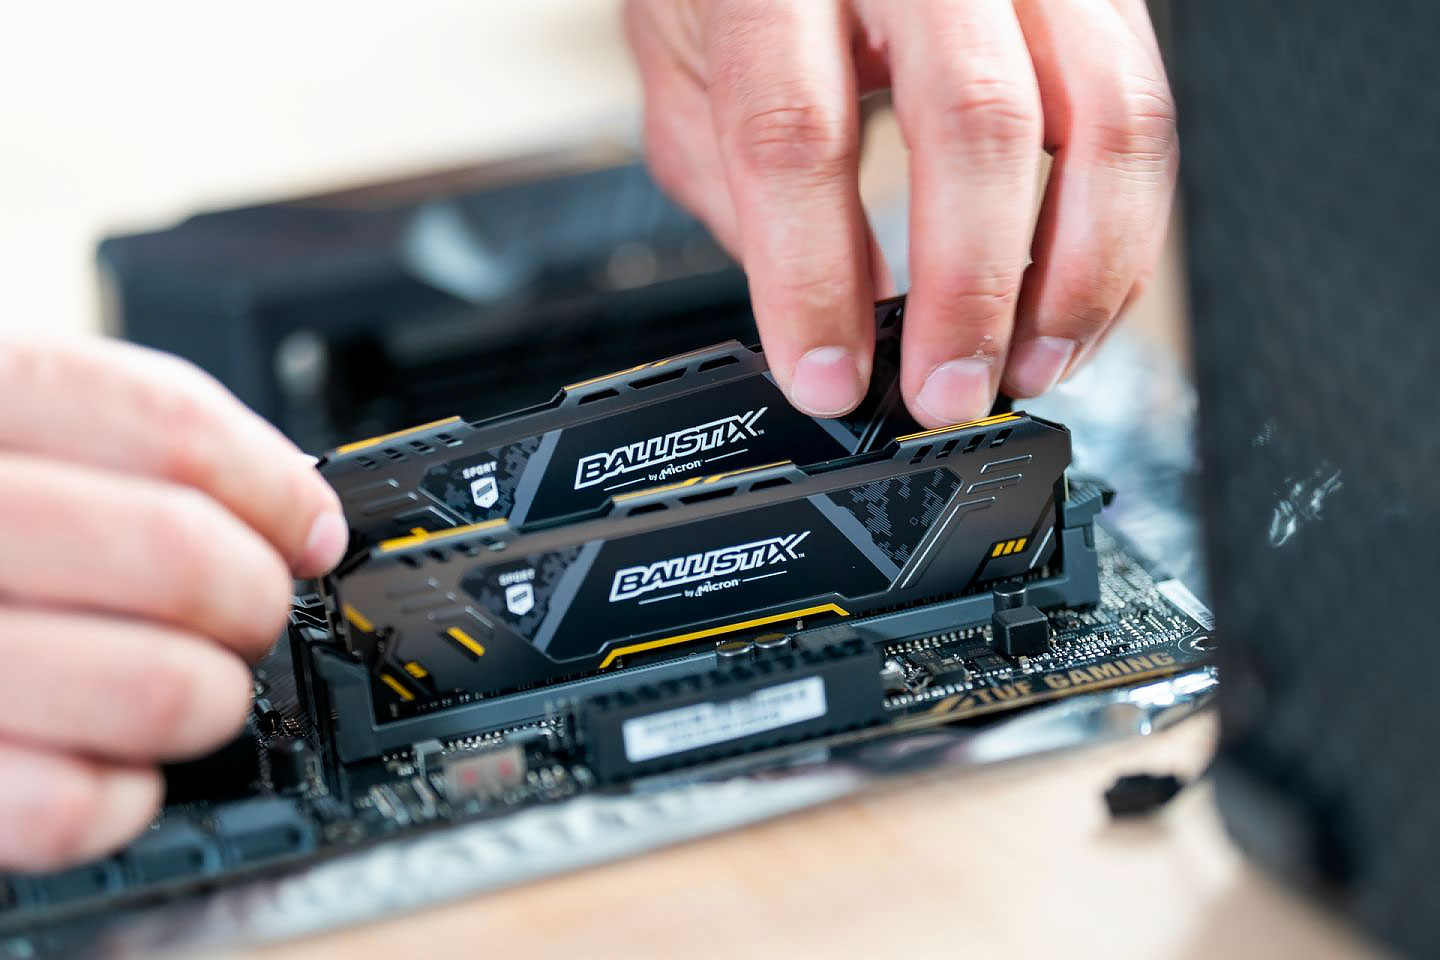 Ballistix memory cards being placed in a motherboard